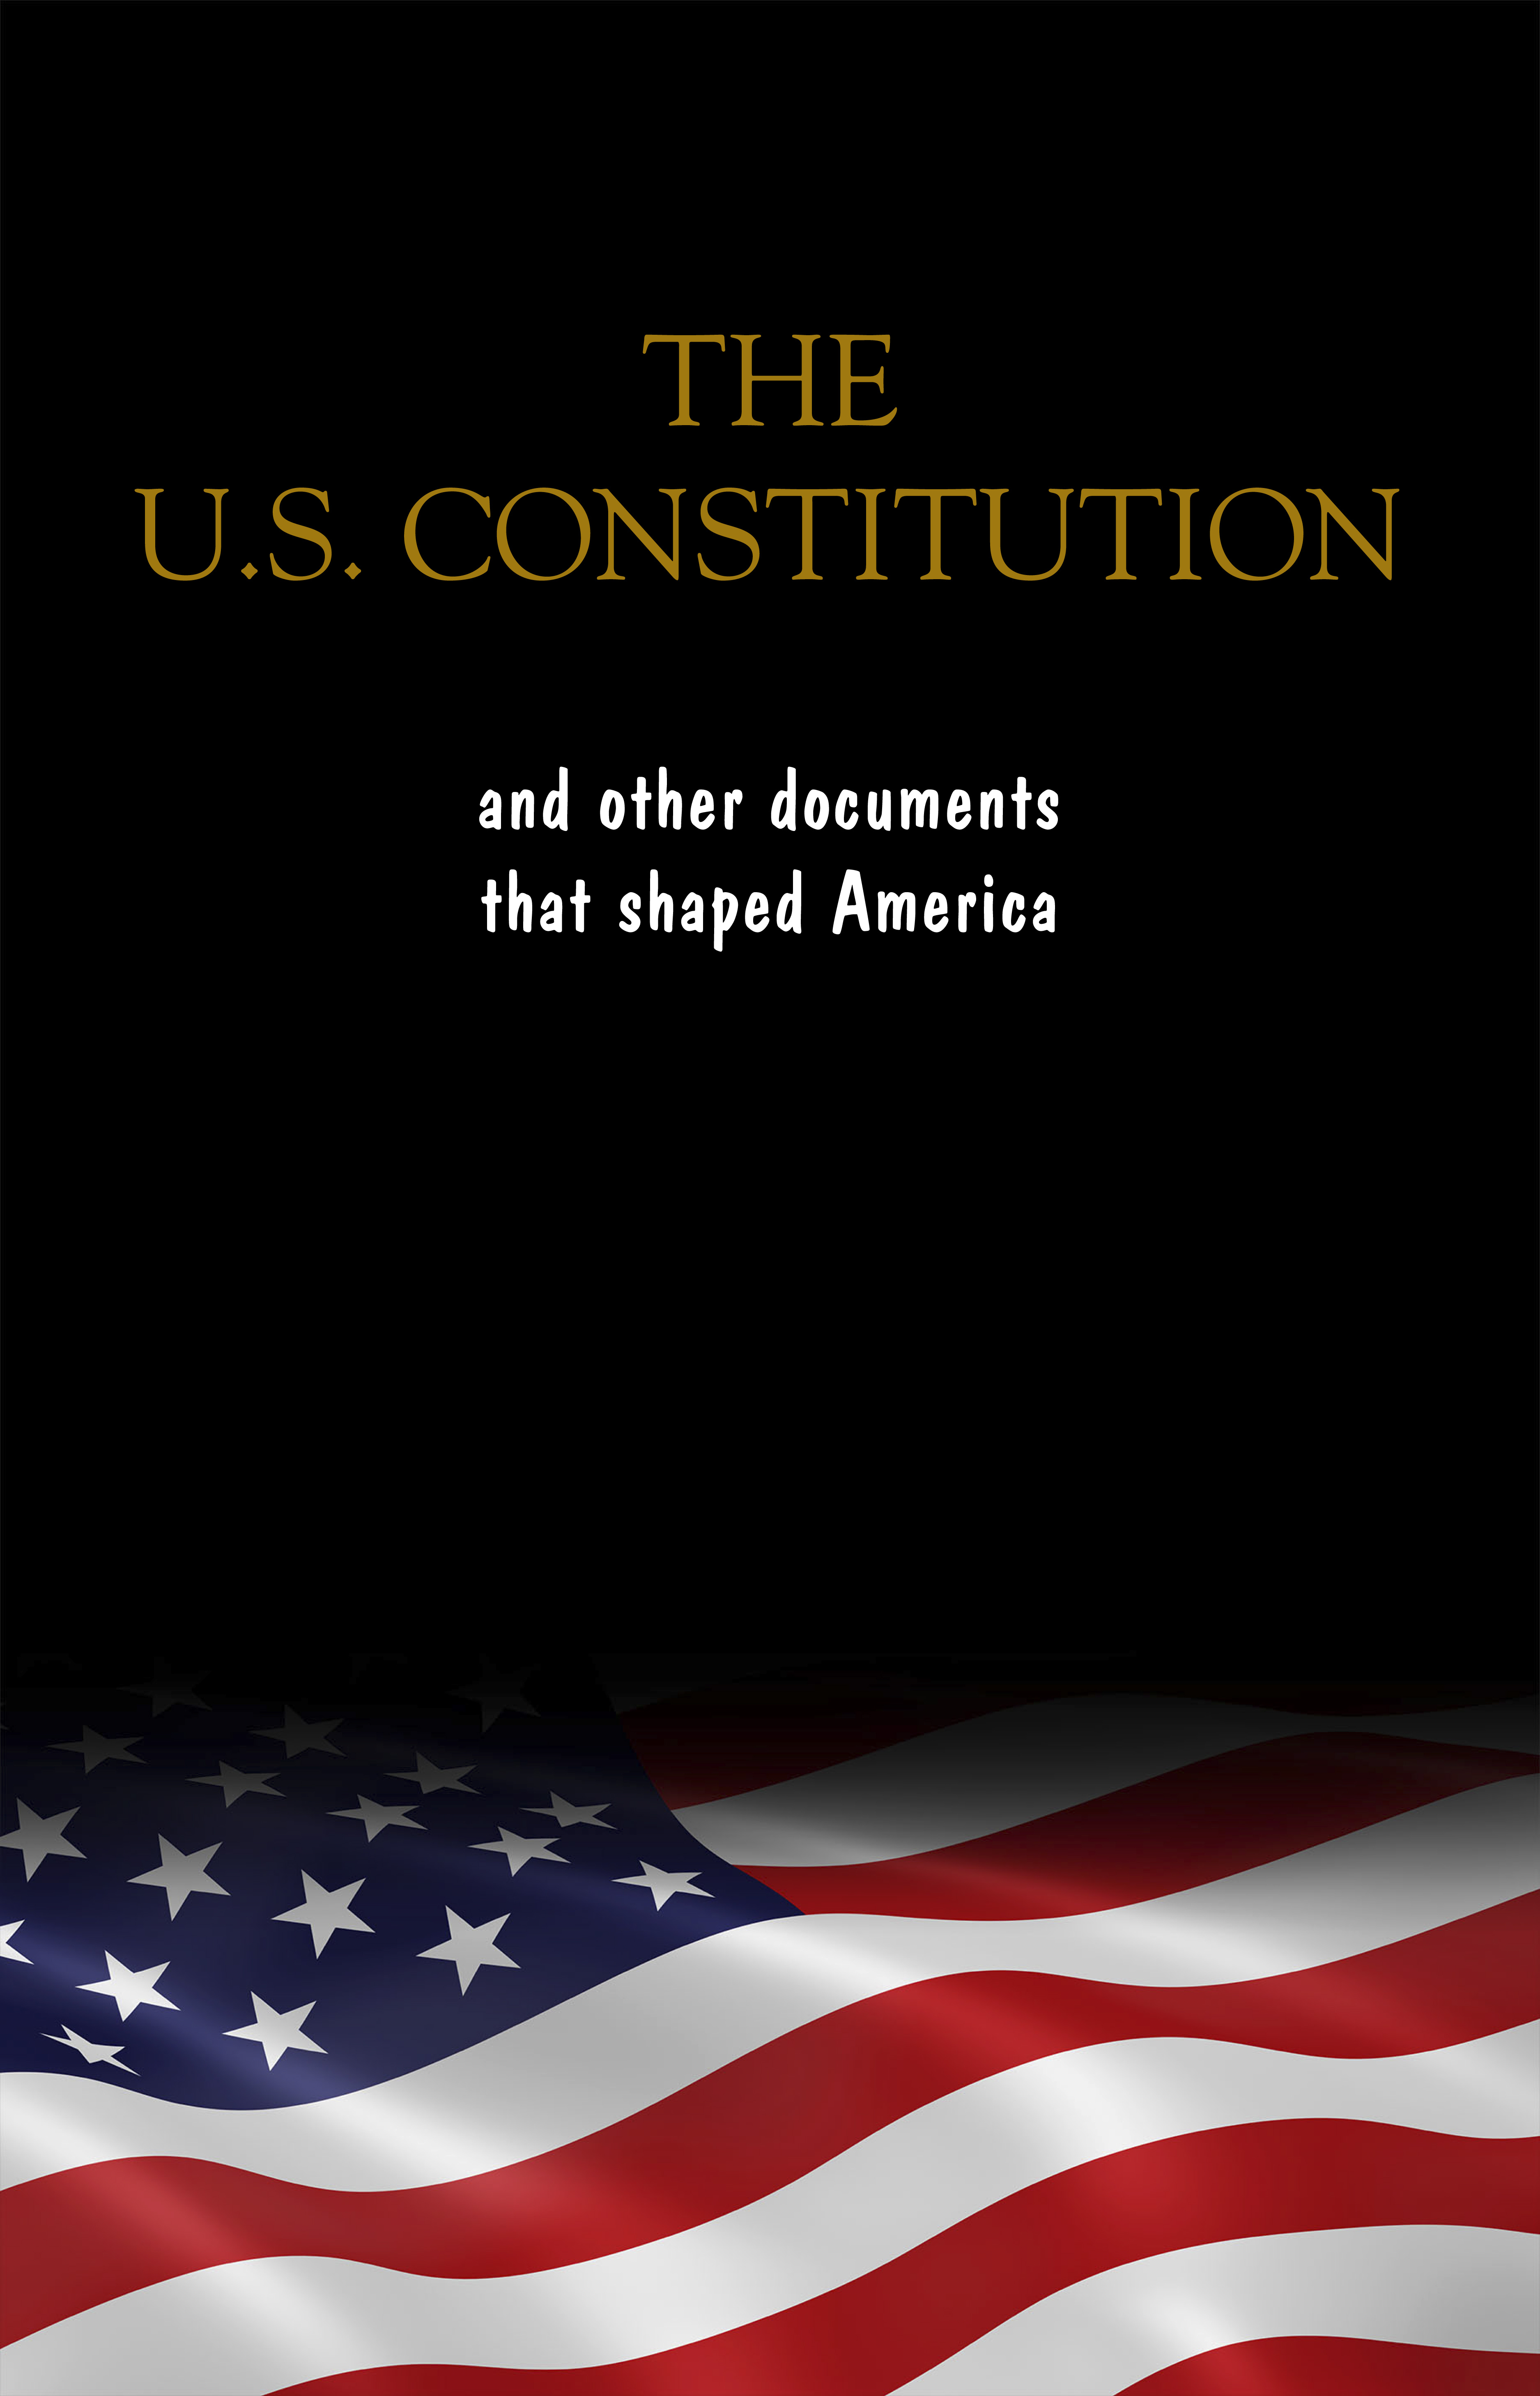 The Constitution of the United States, the Declaration of Independence and The Bill of Rights: The U.S. Constitution, all the Amendments and other Essential ... Documents of the American History Full text